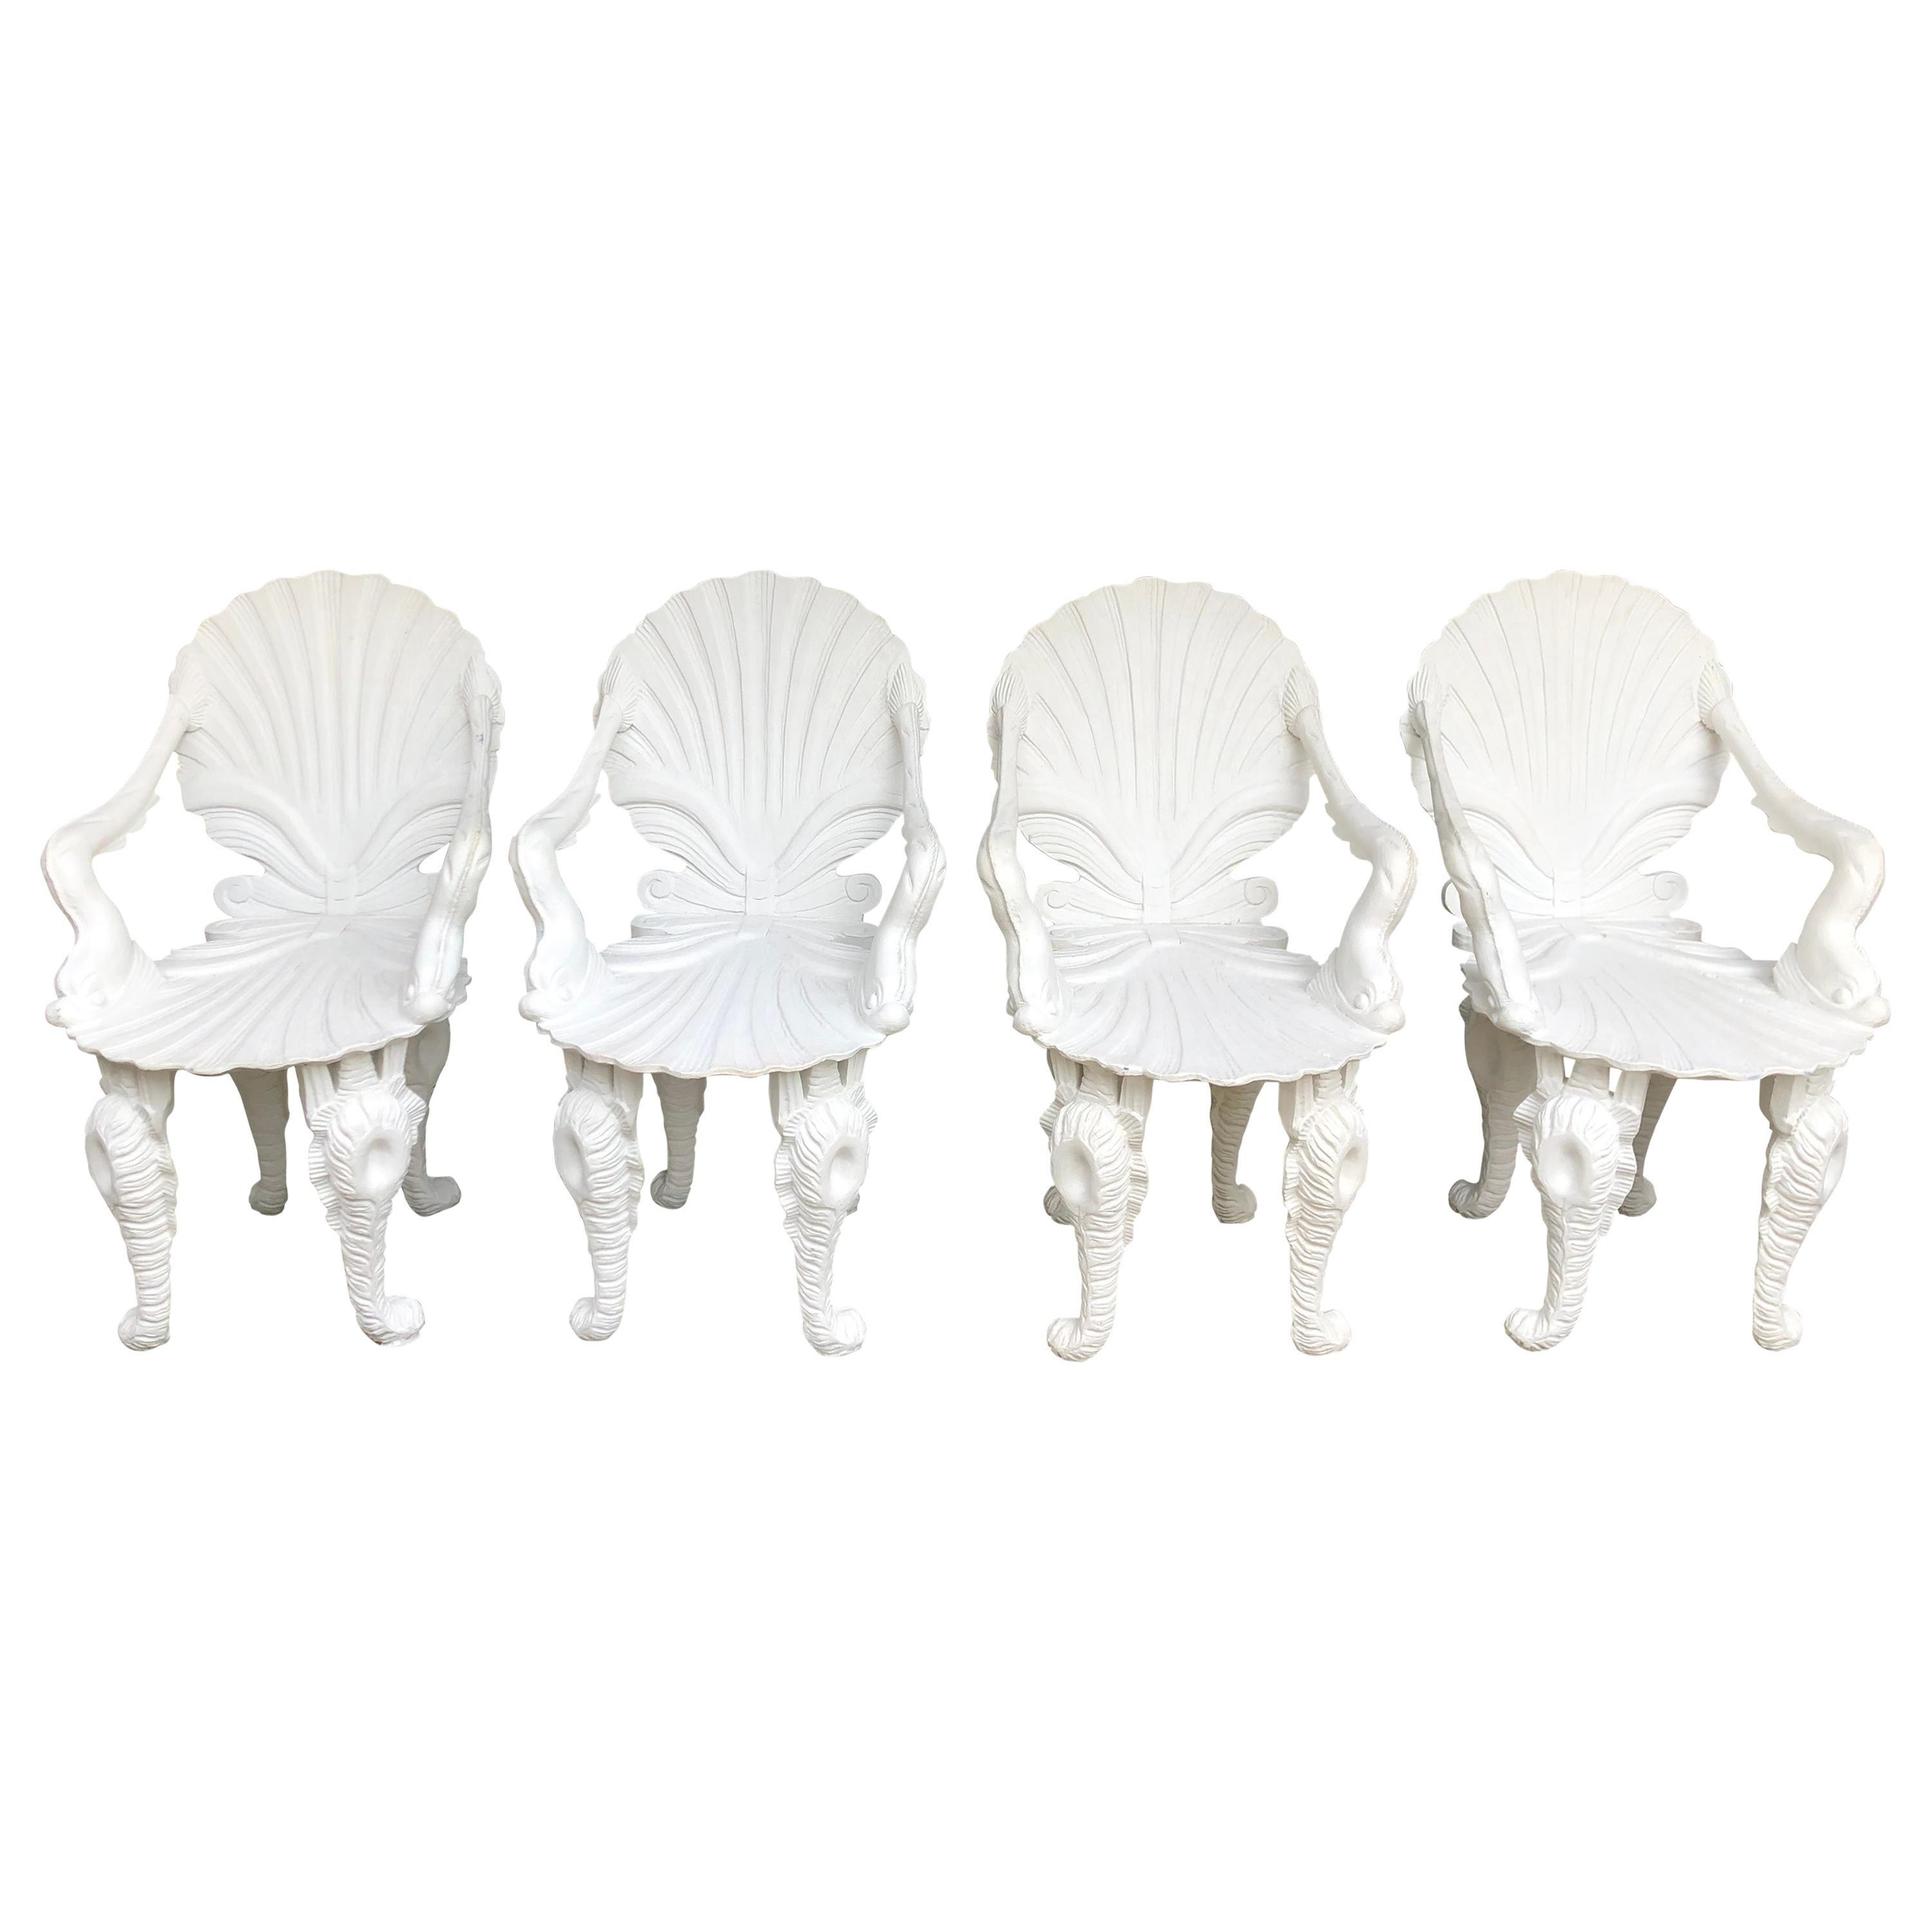 Pair of White Carved Wood Grotto Armchairs